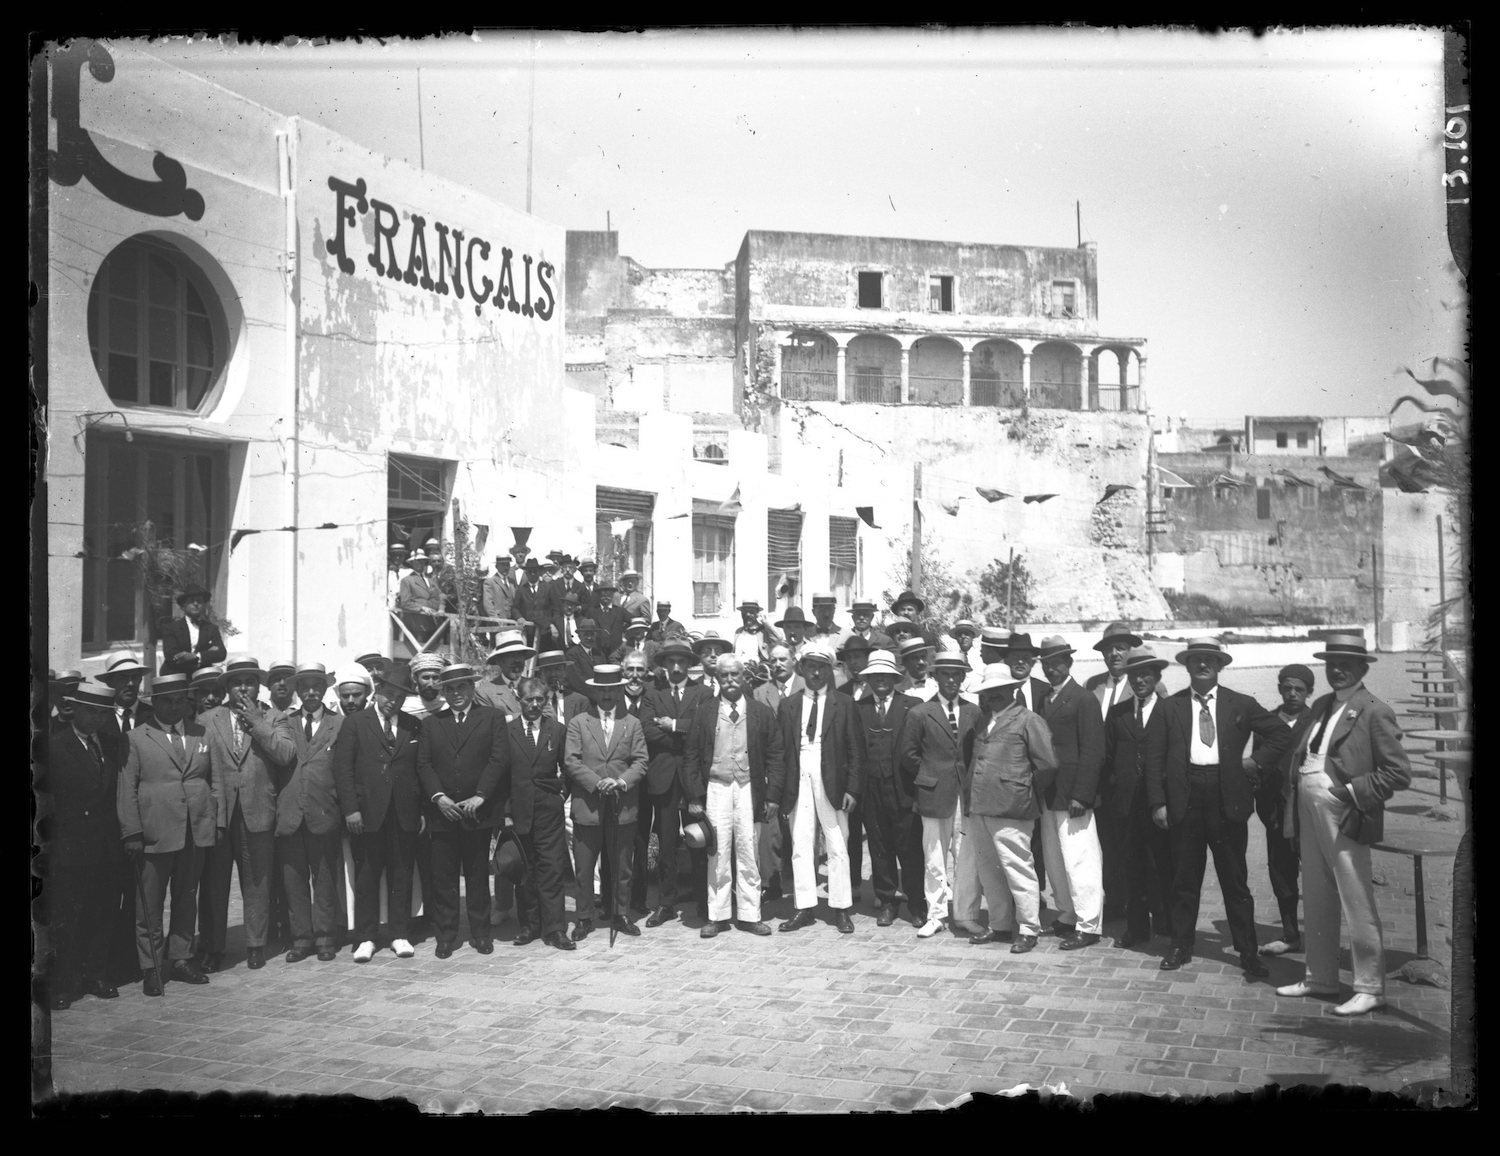 A large group of men in suits and hats pose outside of a the Kursaal 